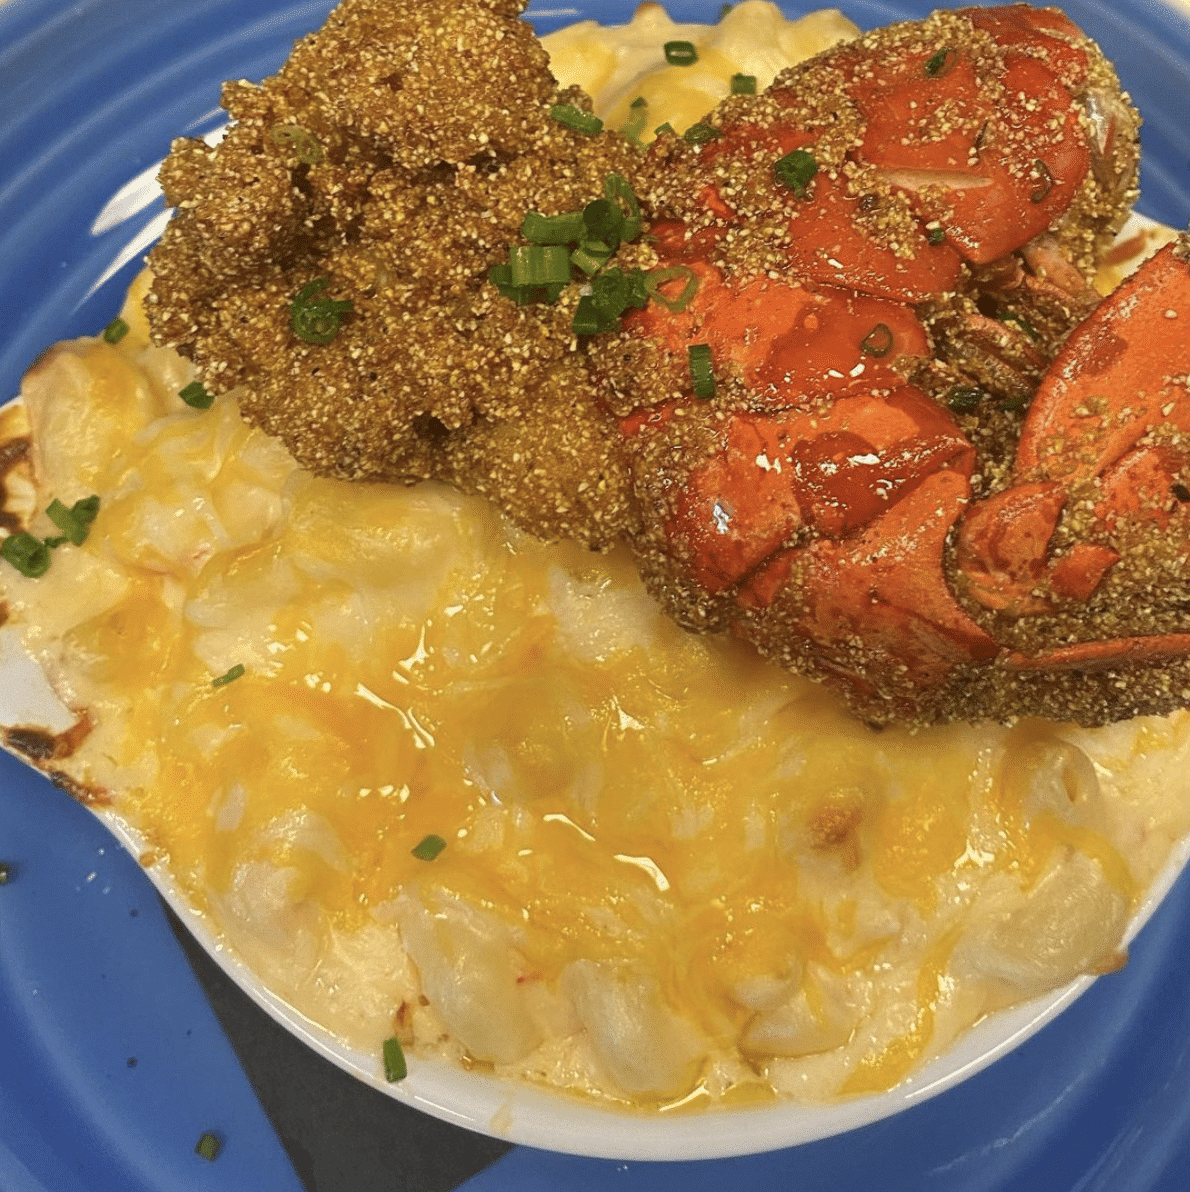 A plate of fried shrimp and macaroni & cheese from the new Breakfast Boys restaurant in Atlanta